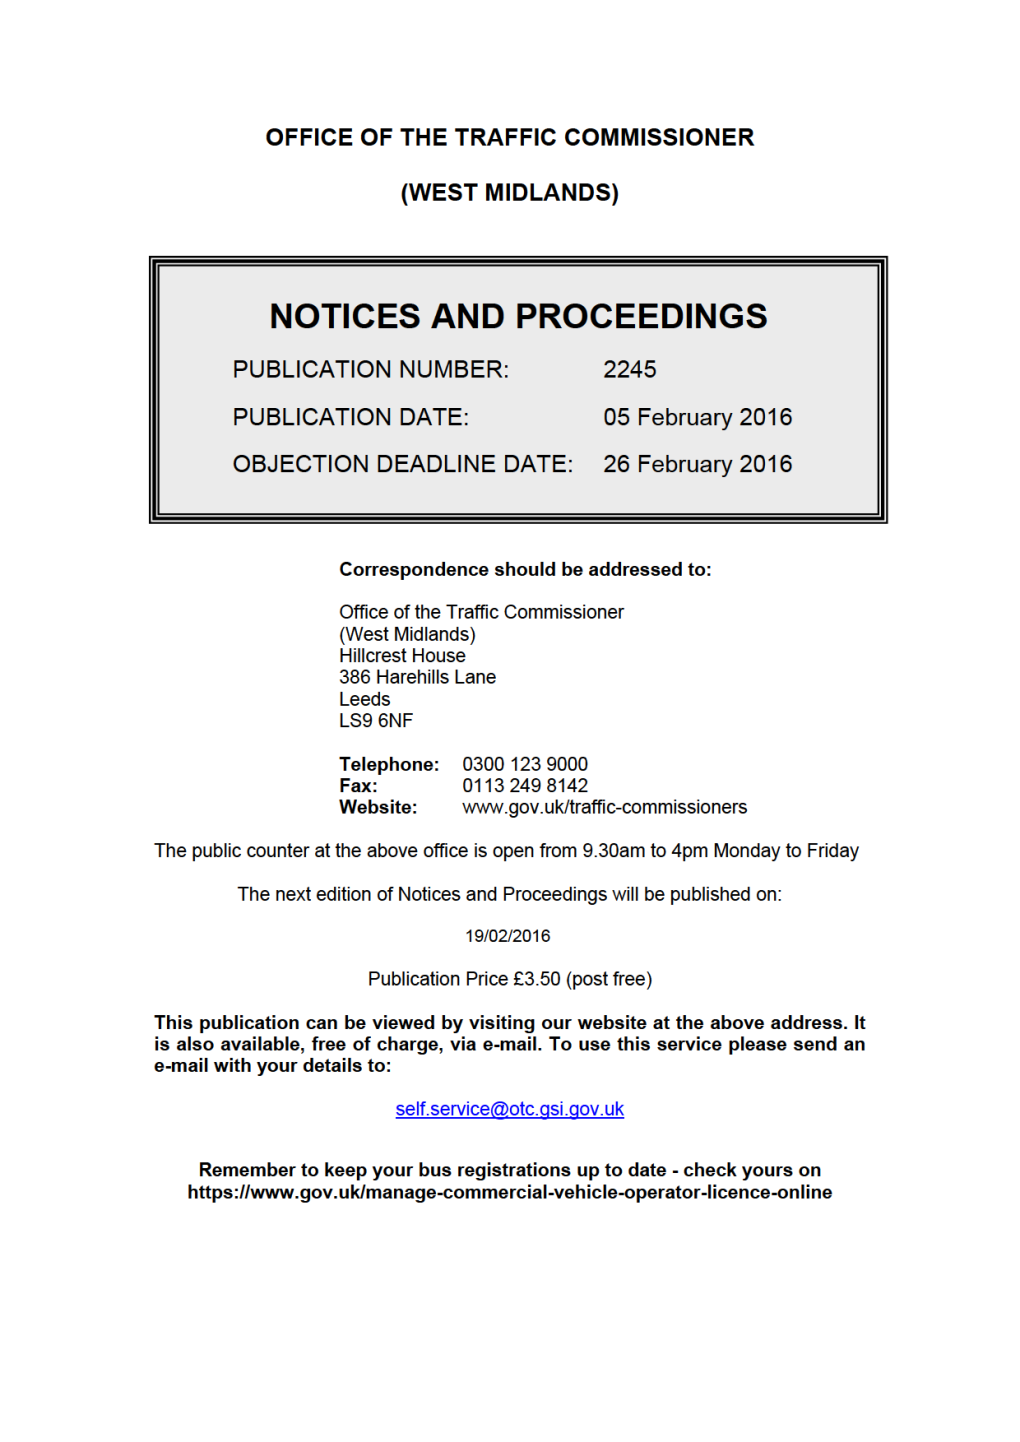 NOTICES and PROCEEDINGS 5 February 2016